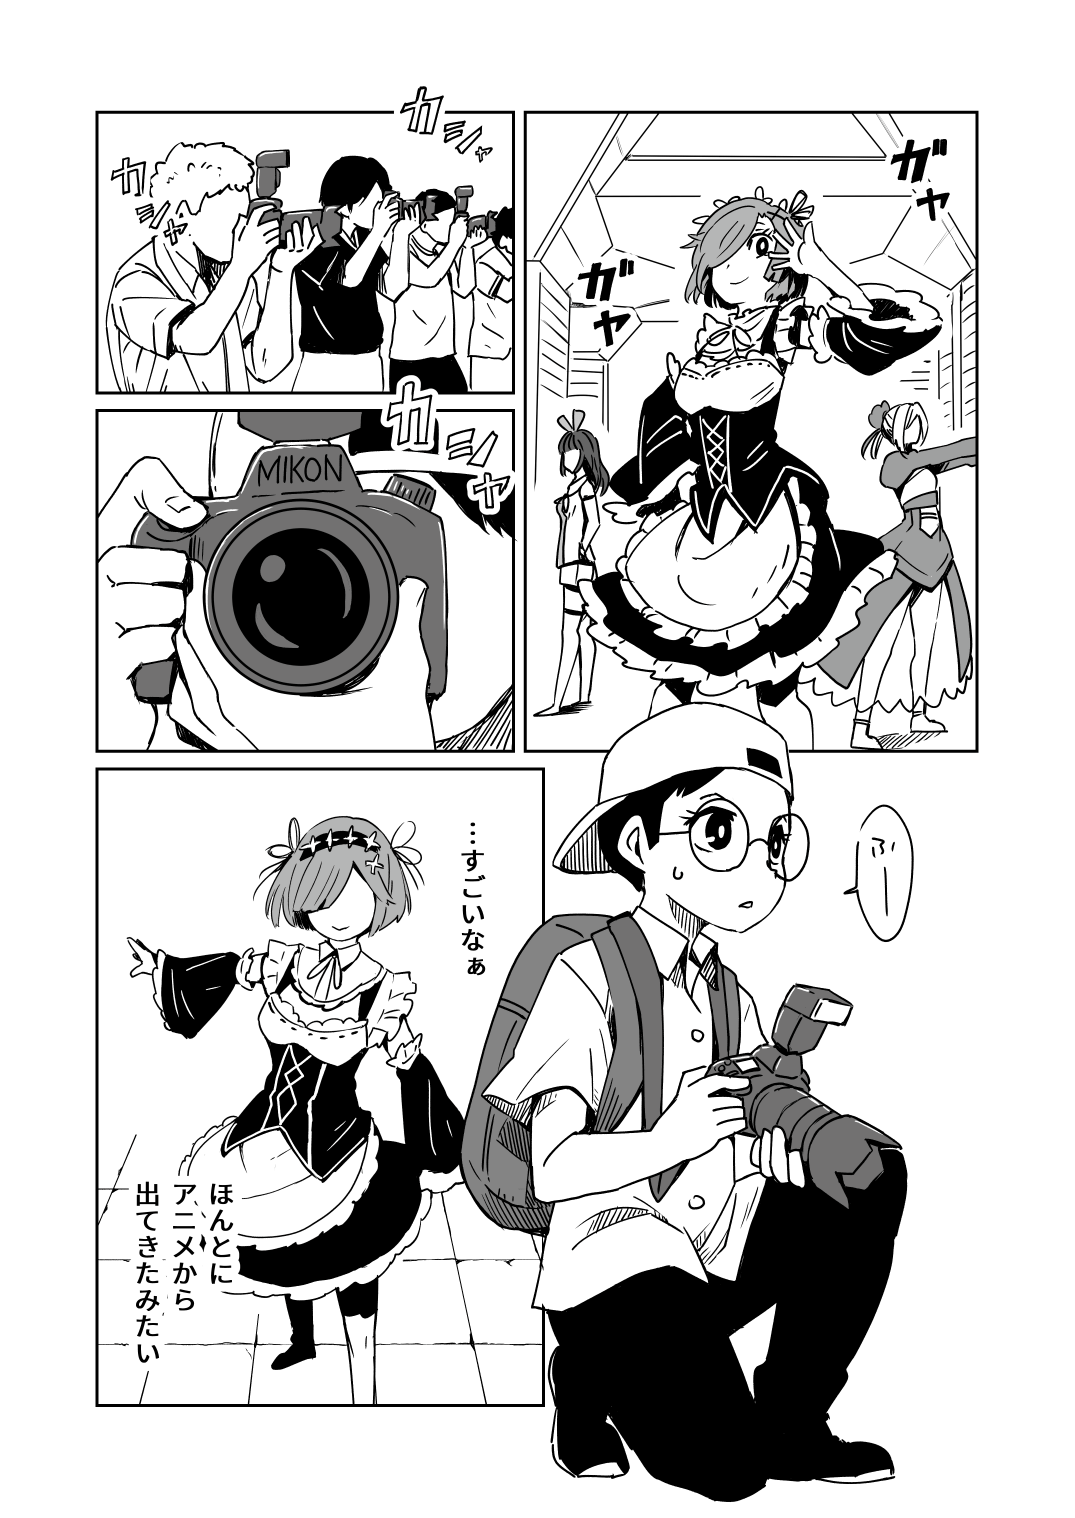 A Manga Where The Photographer is the Subject